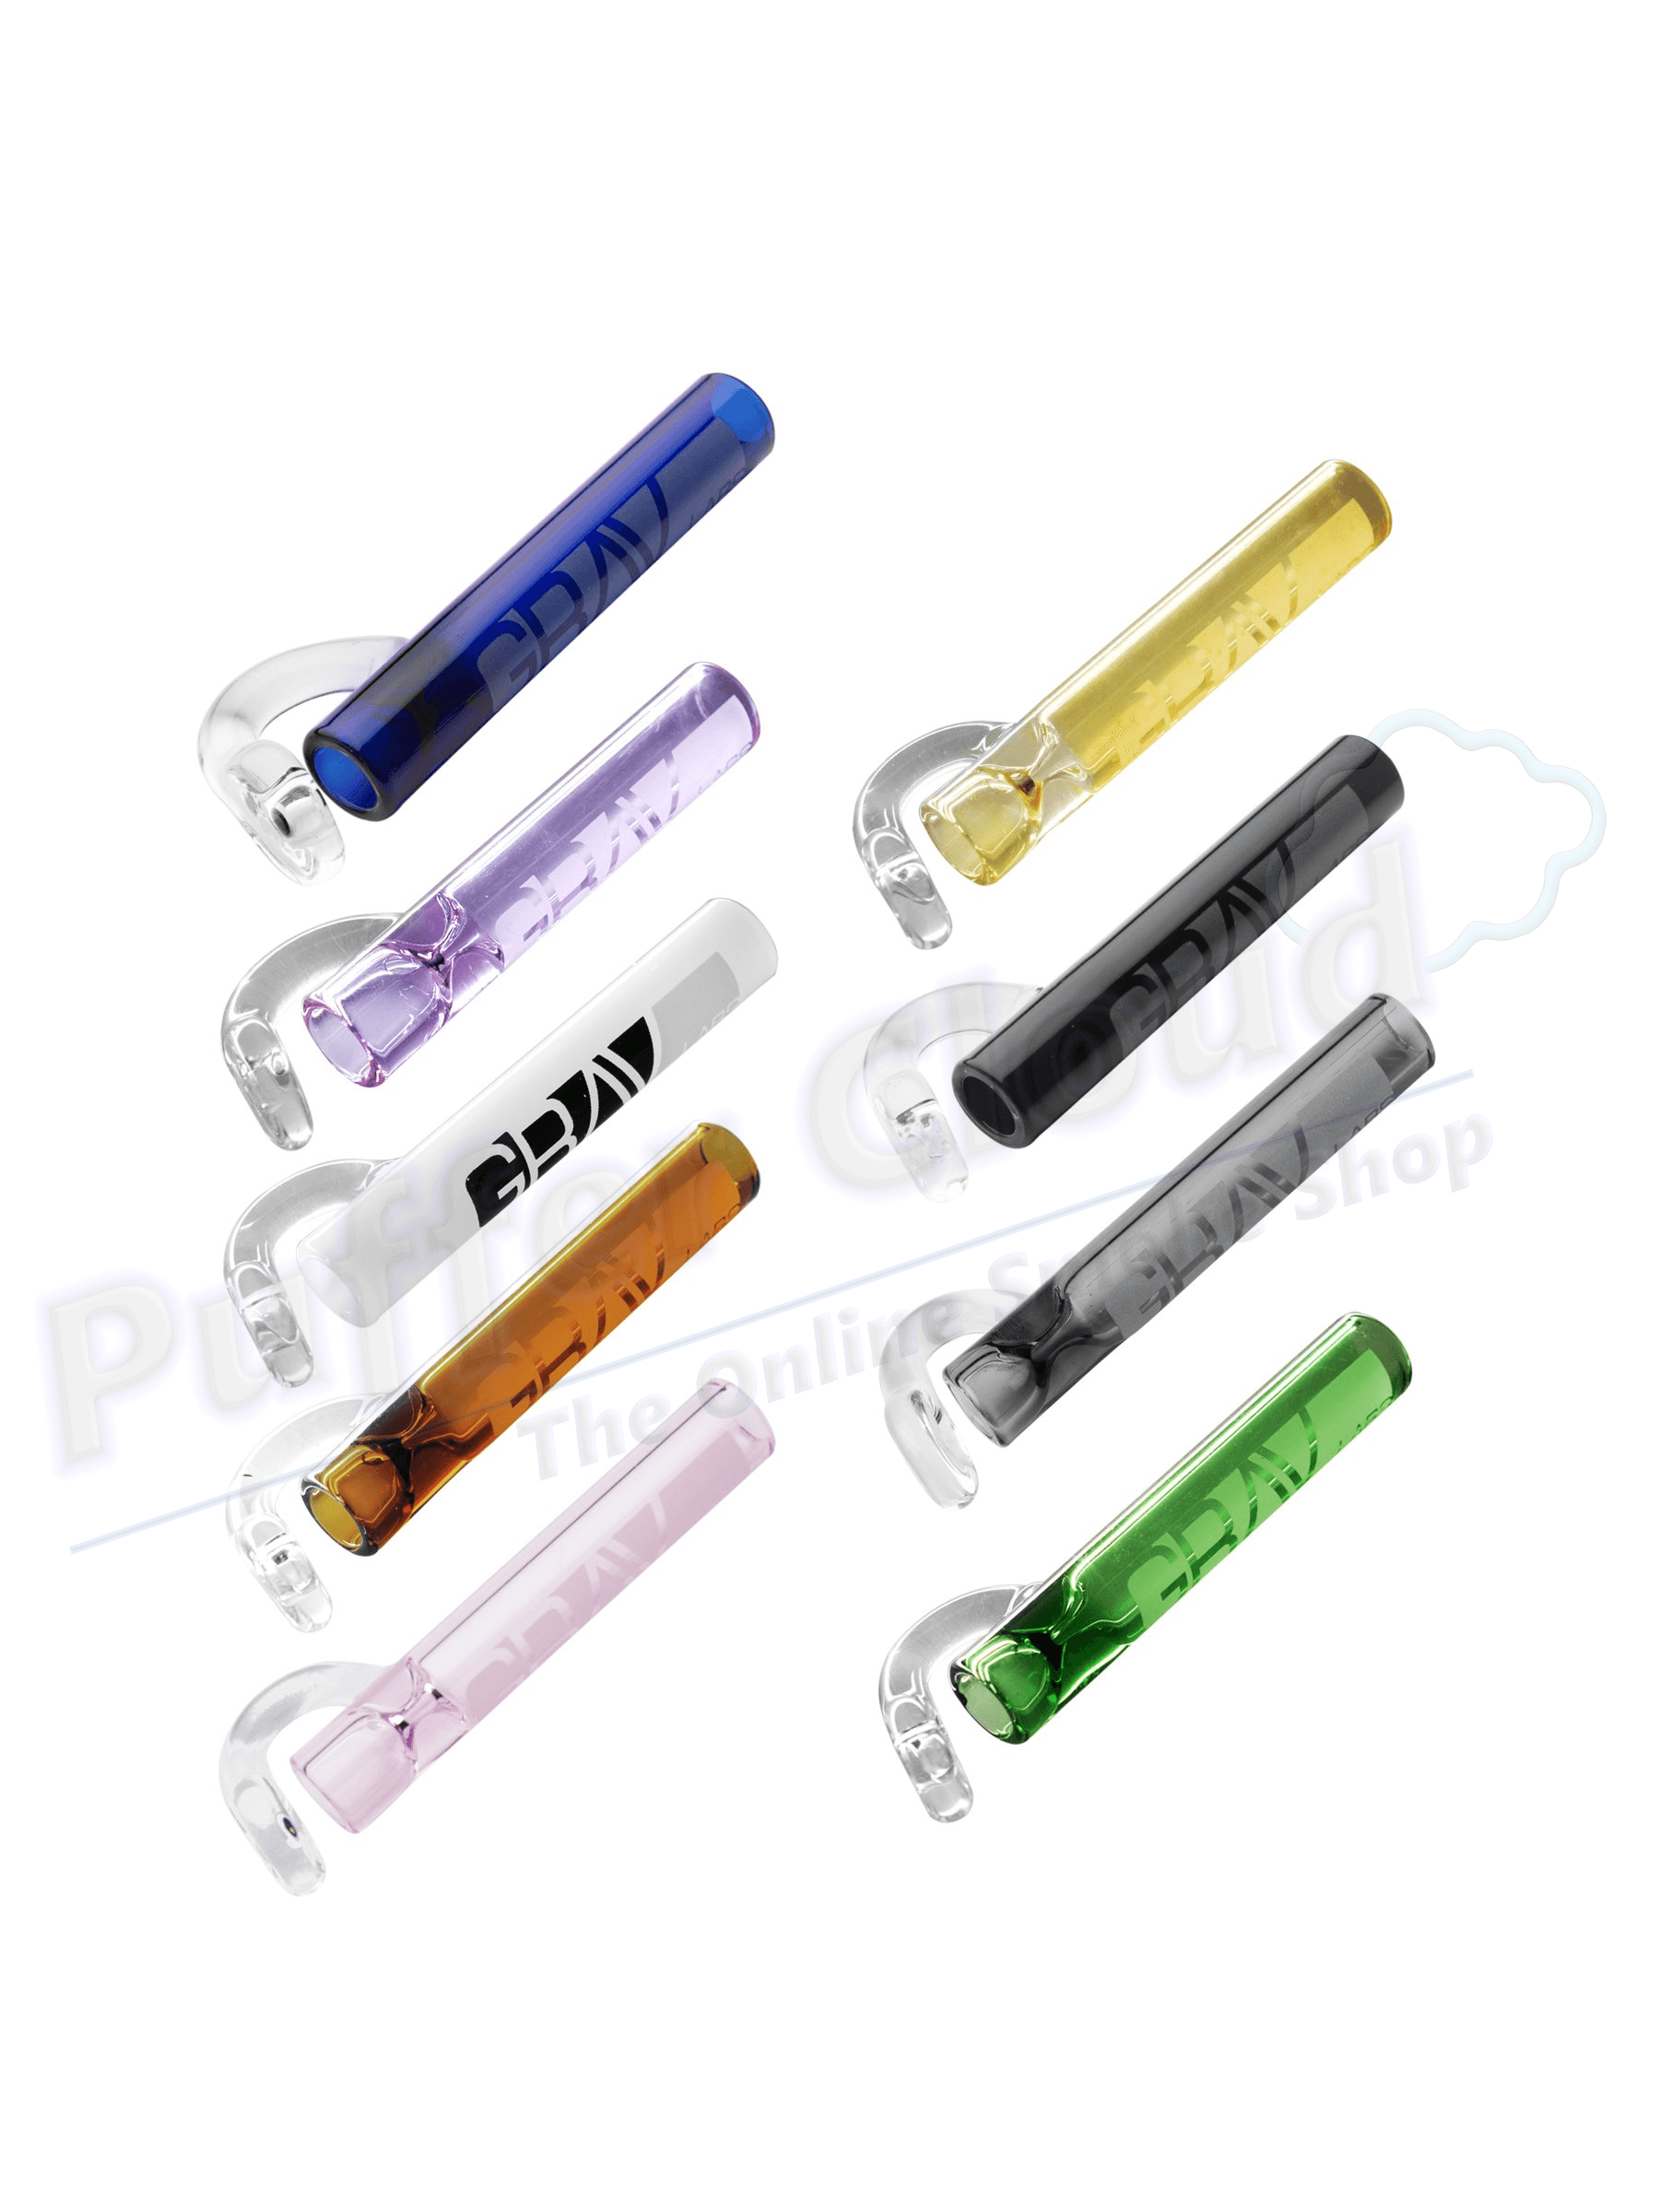 12mm GRAV Concentrate Taster - Puffer Cloud | The World's Best Online Smoke and Head Shop